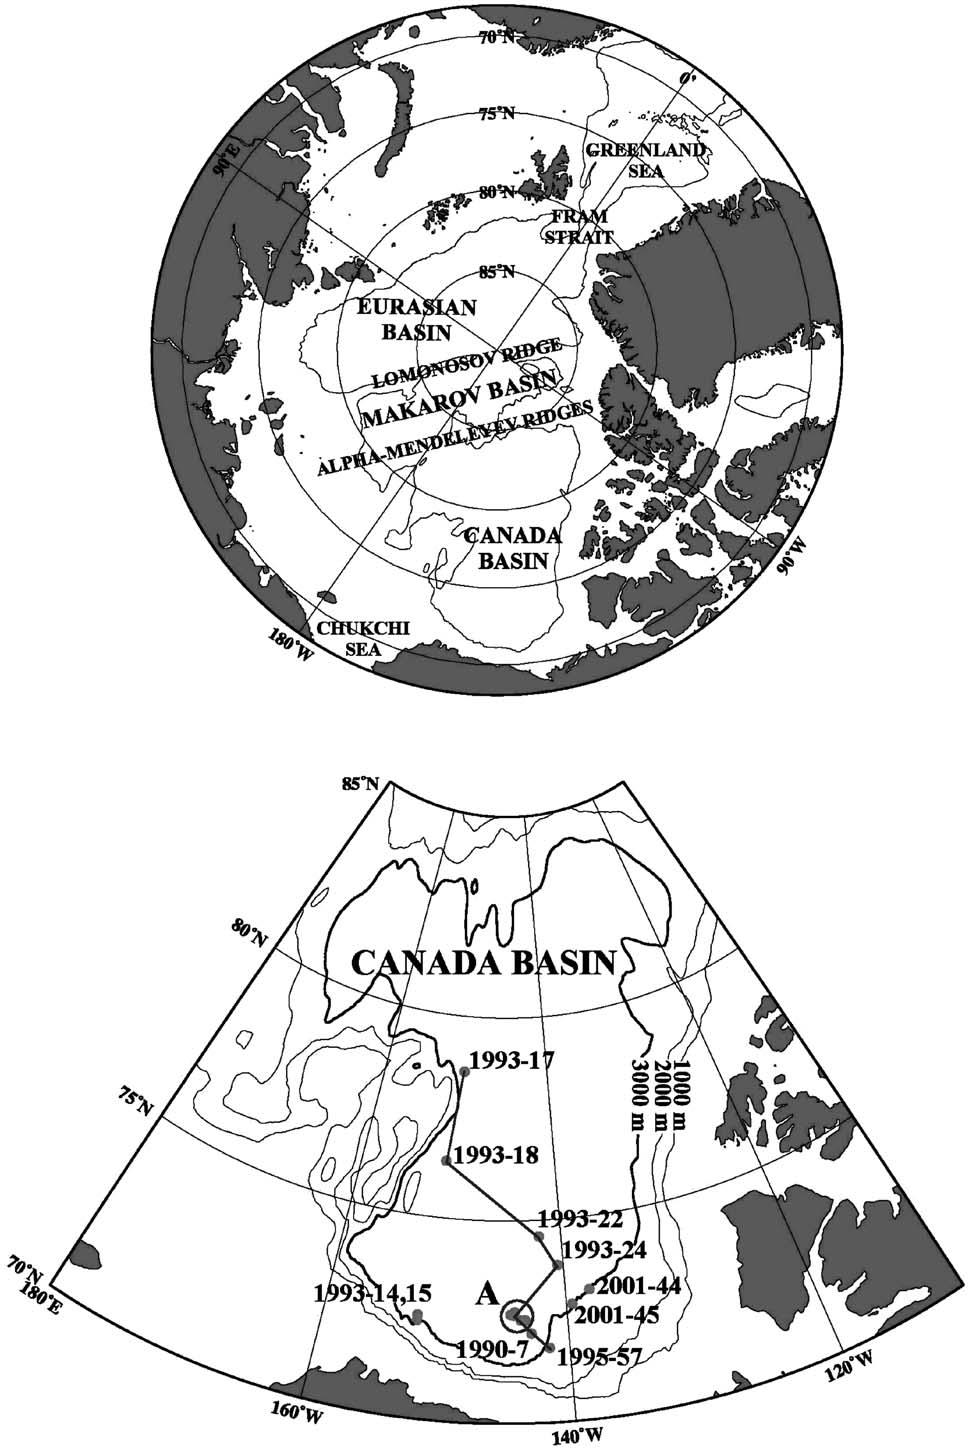 1306 M.-L. Timmermans et al. / Deep-Sea Research I 50 (2003) 1305 1321 Fig. 1. Top: The Arctic Ocean. The Canadian Basin consists of the Makarov and Canada basins.